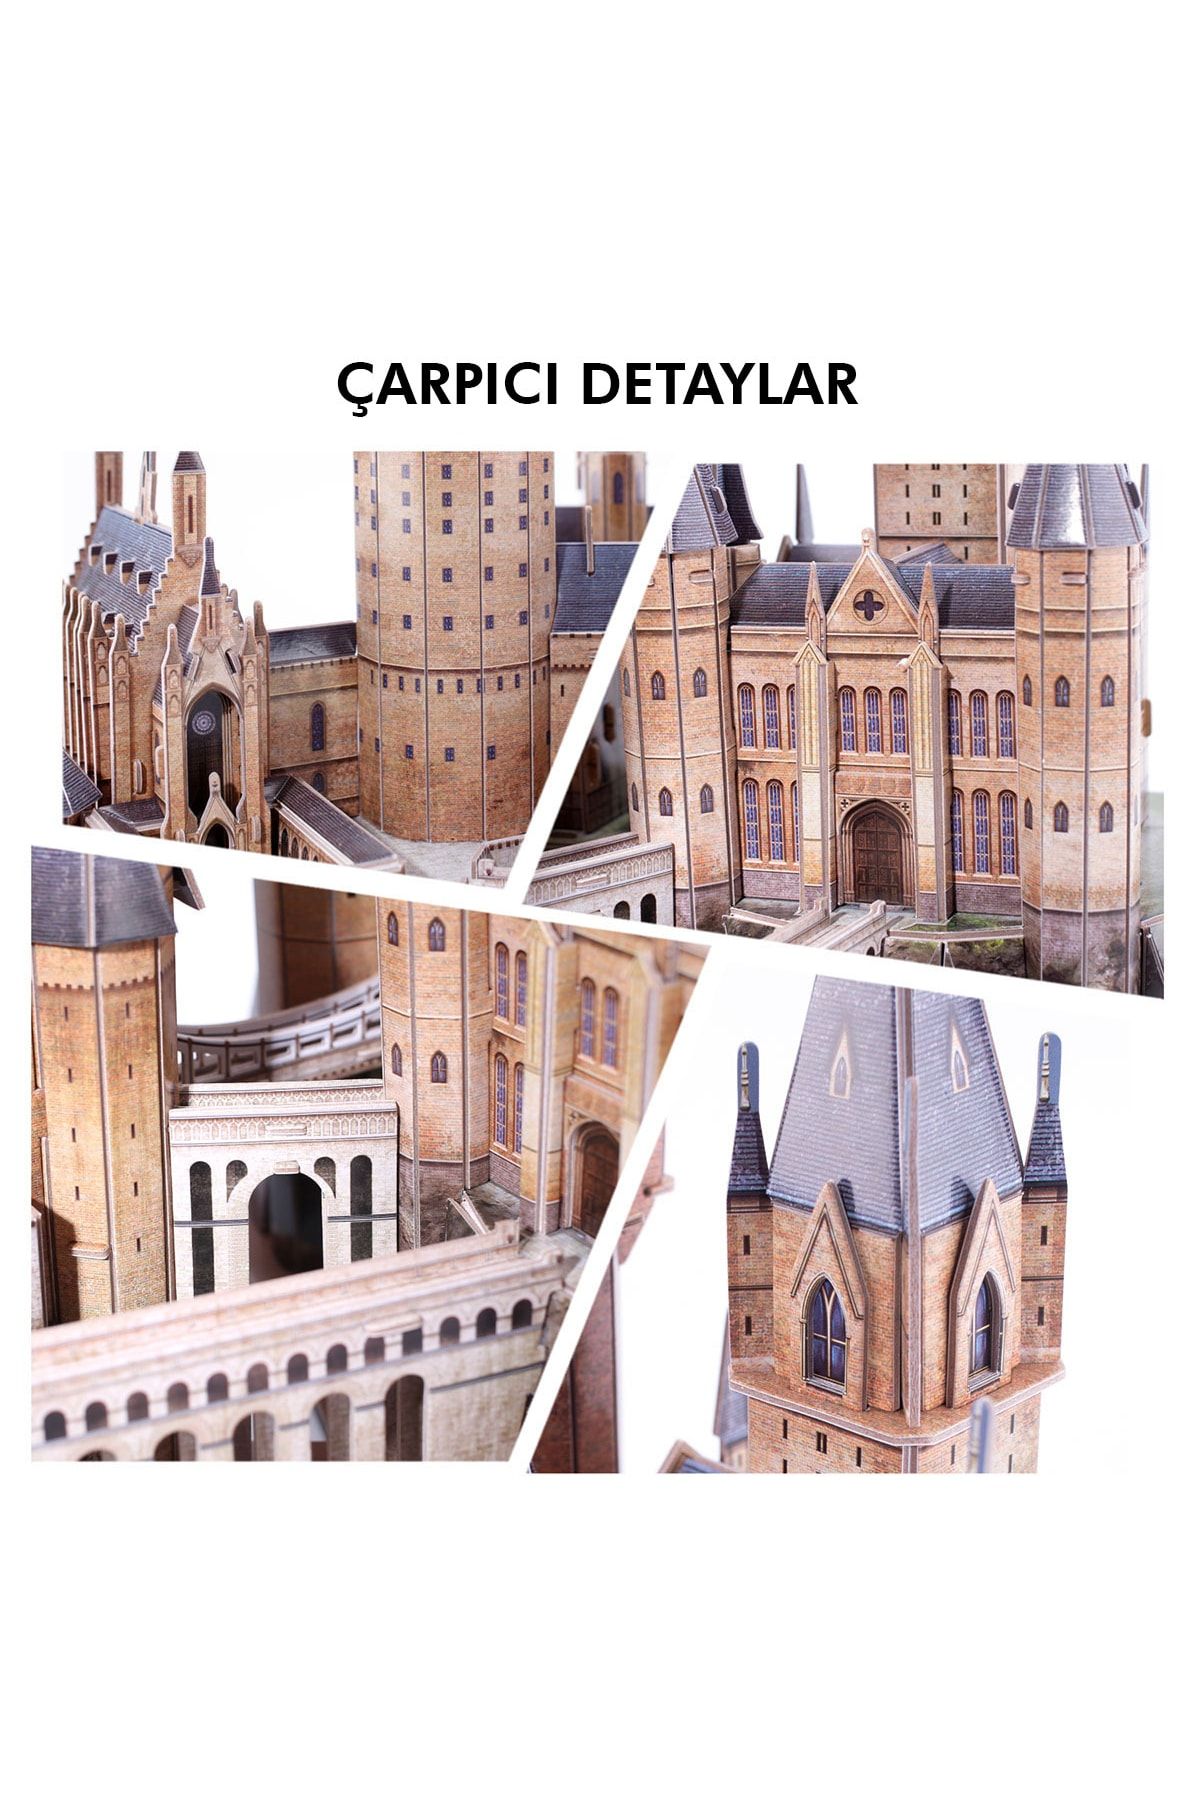 Puzzle 3d Harry Potter - Castillo Hogwarts – Fun At Home Chile